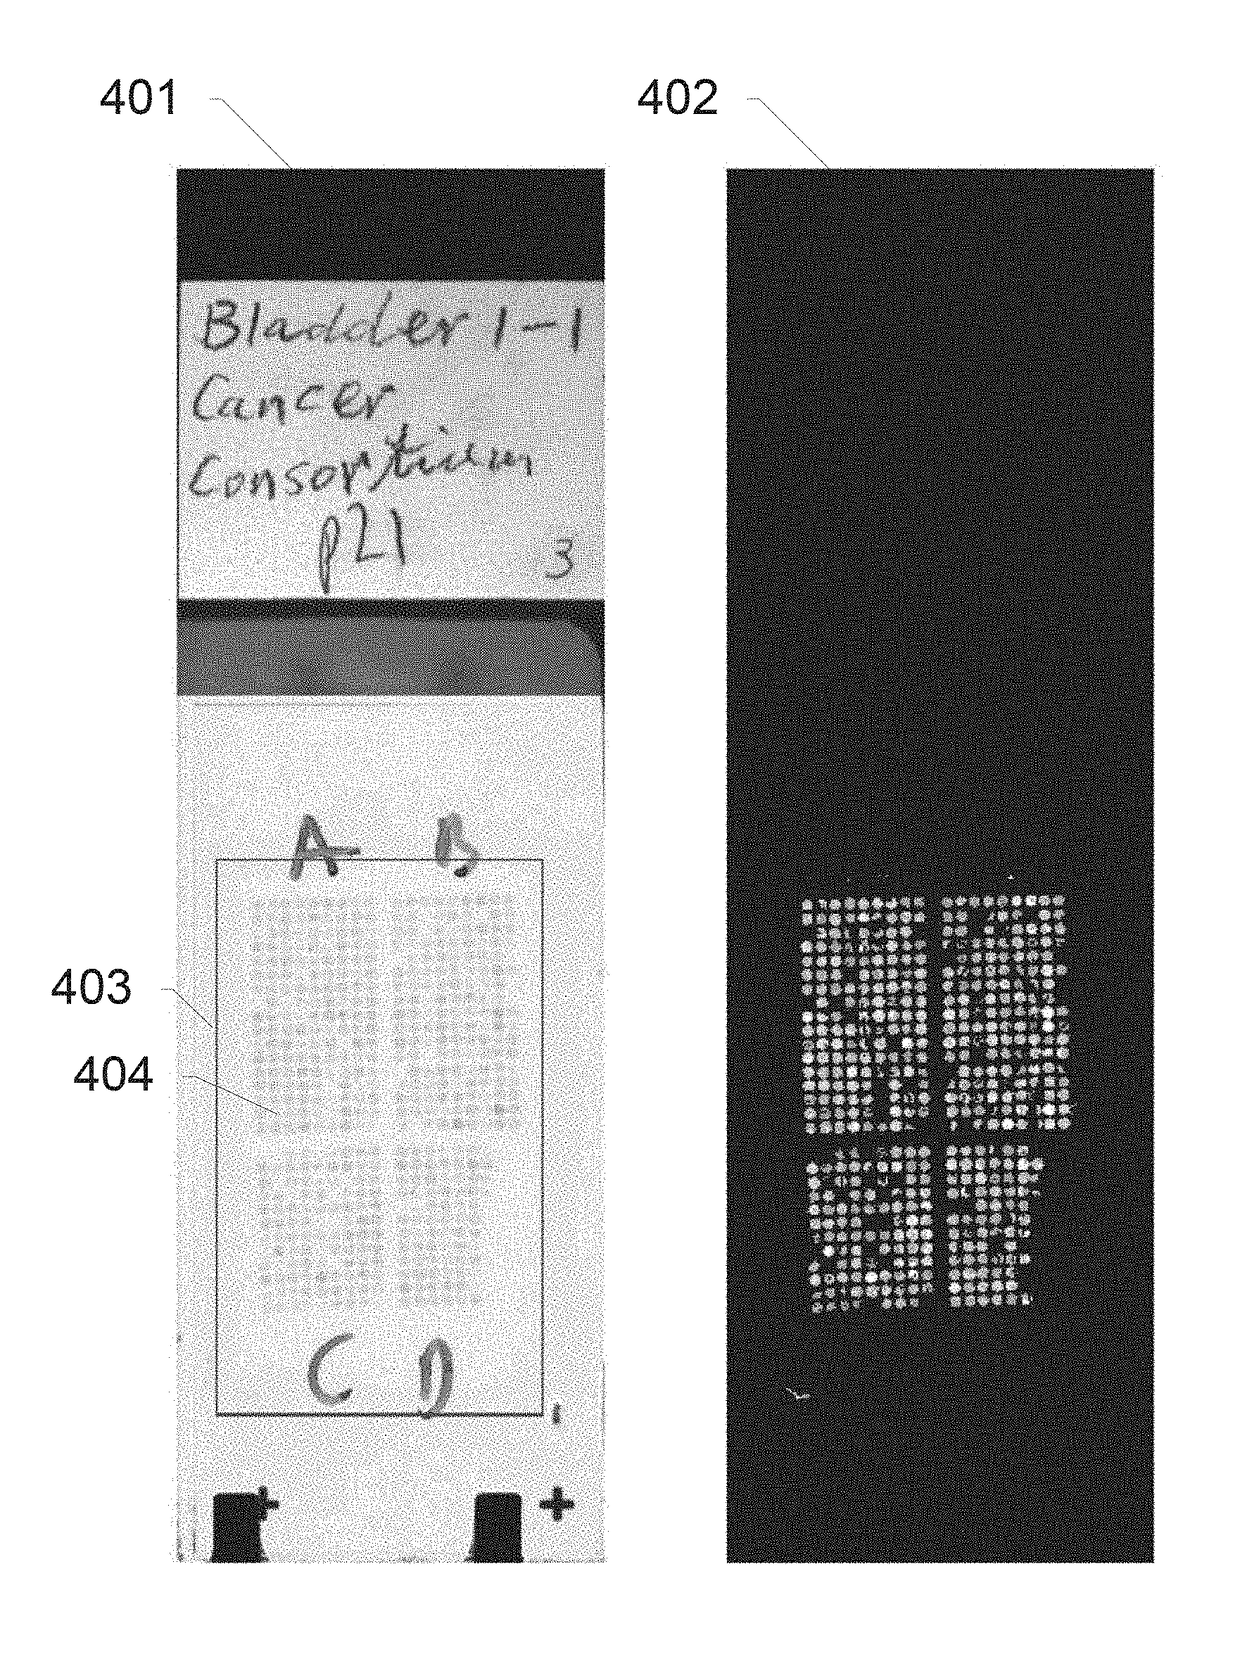 Systems and methods for area-of-interest detection using slide thumbnail images